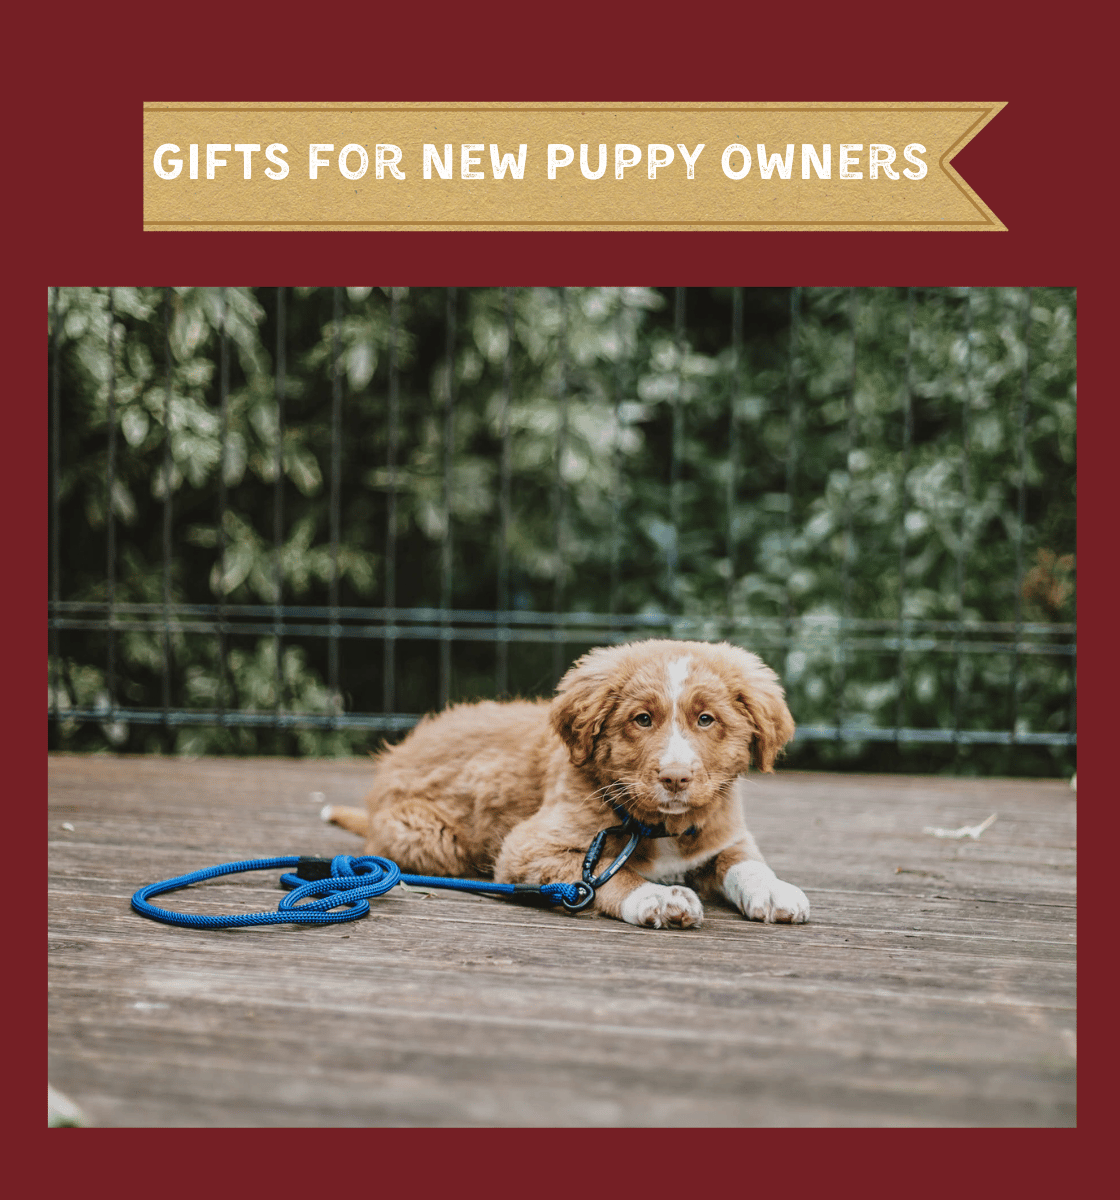 GIFTS FOR NEW PUPPY OWNERS